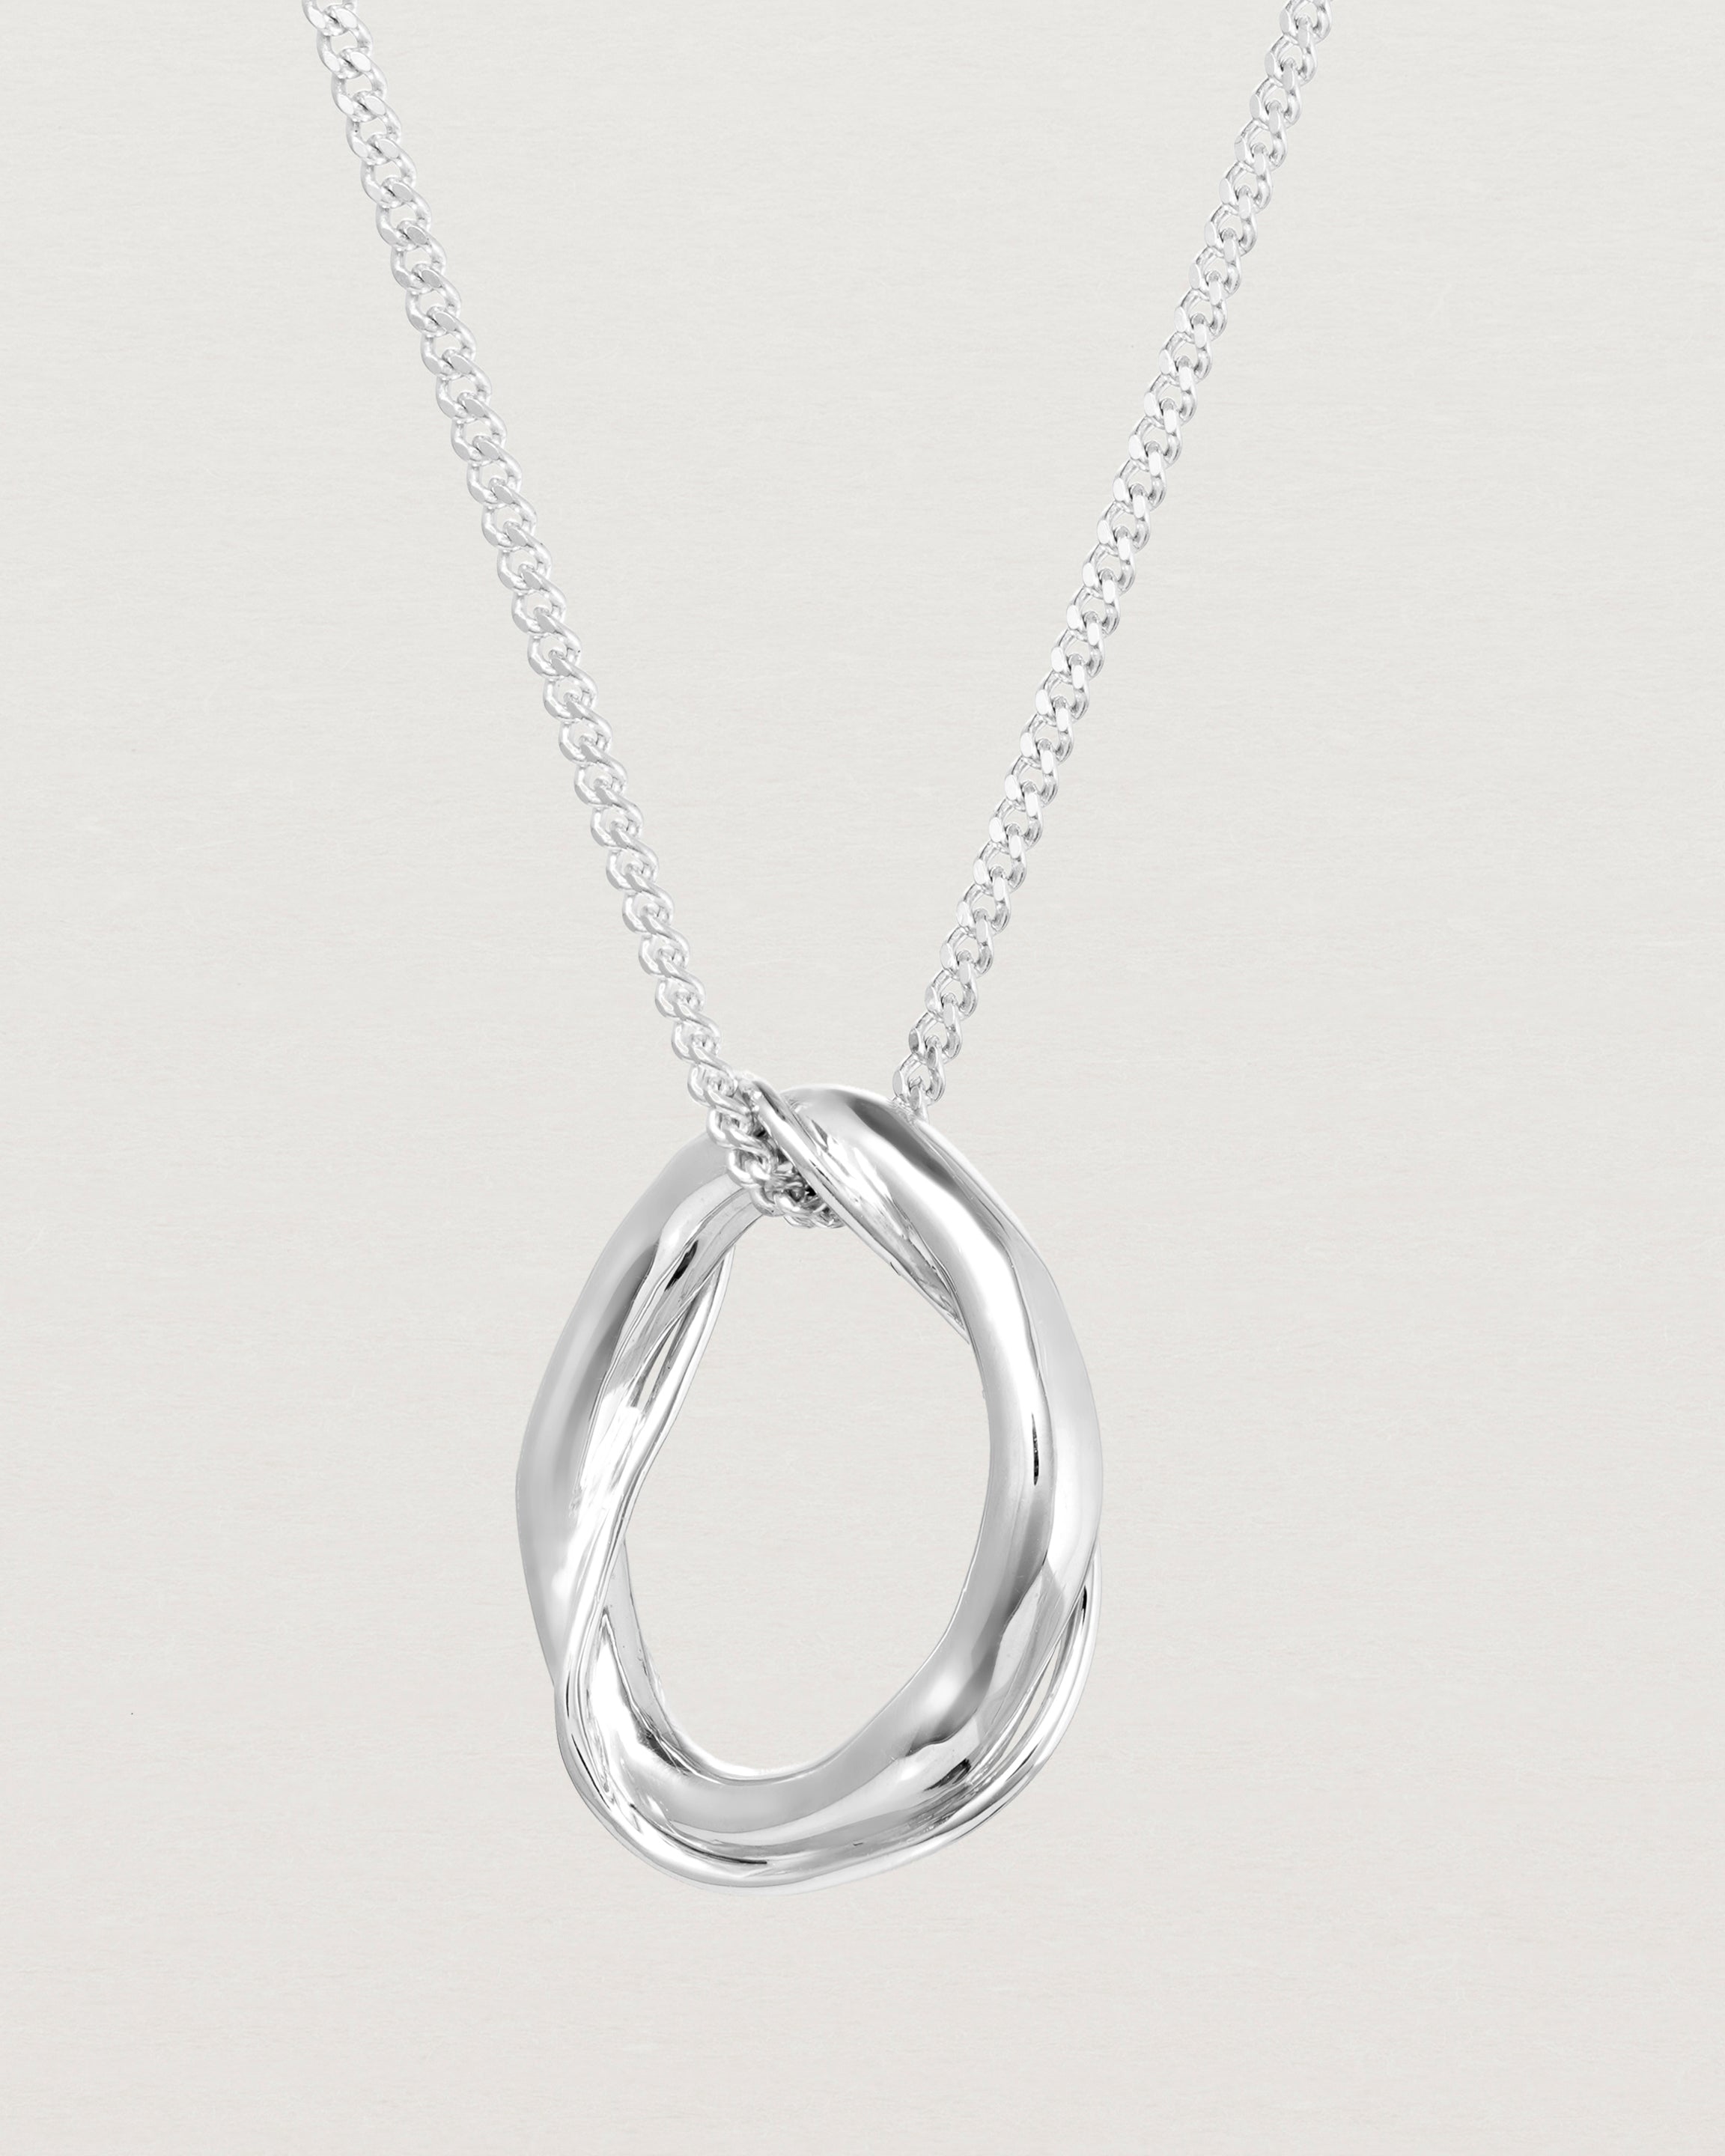 Close up view of the Petite Dalí Necklace in sterling silver.